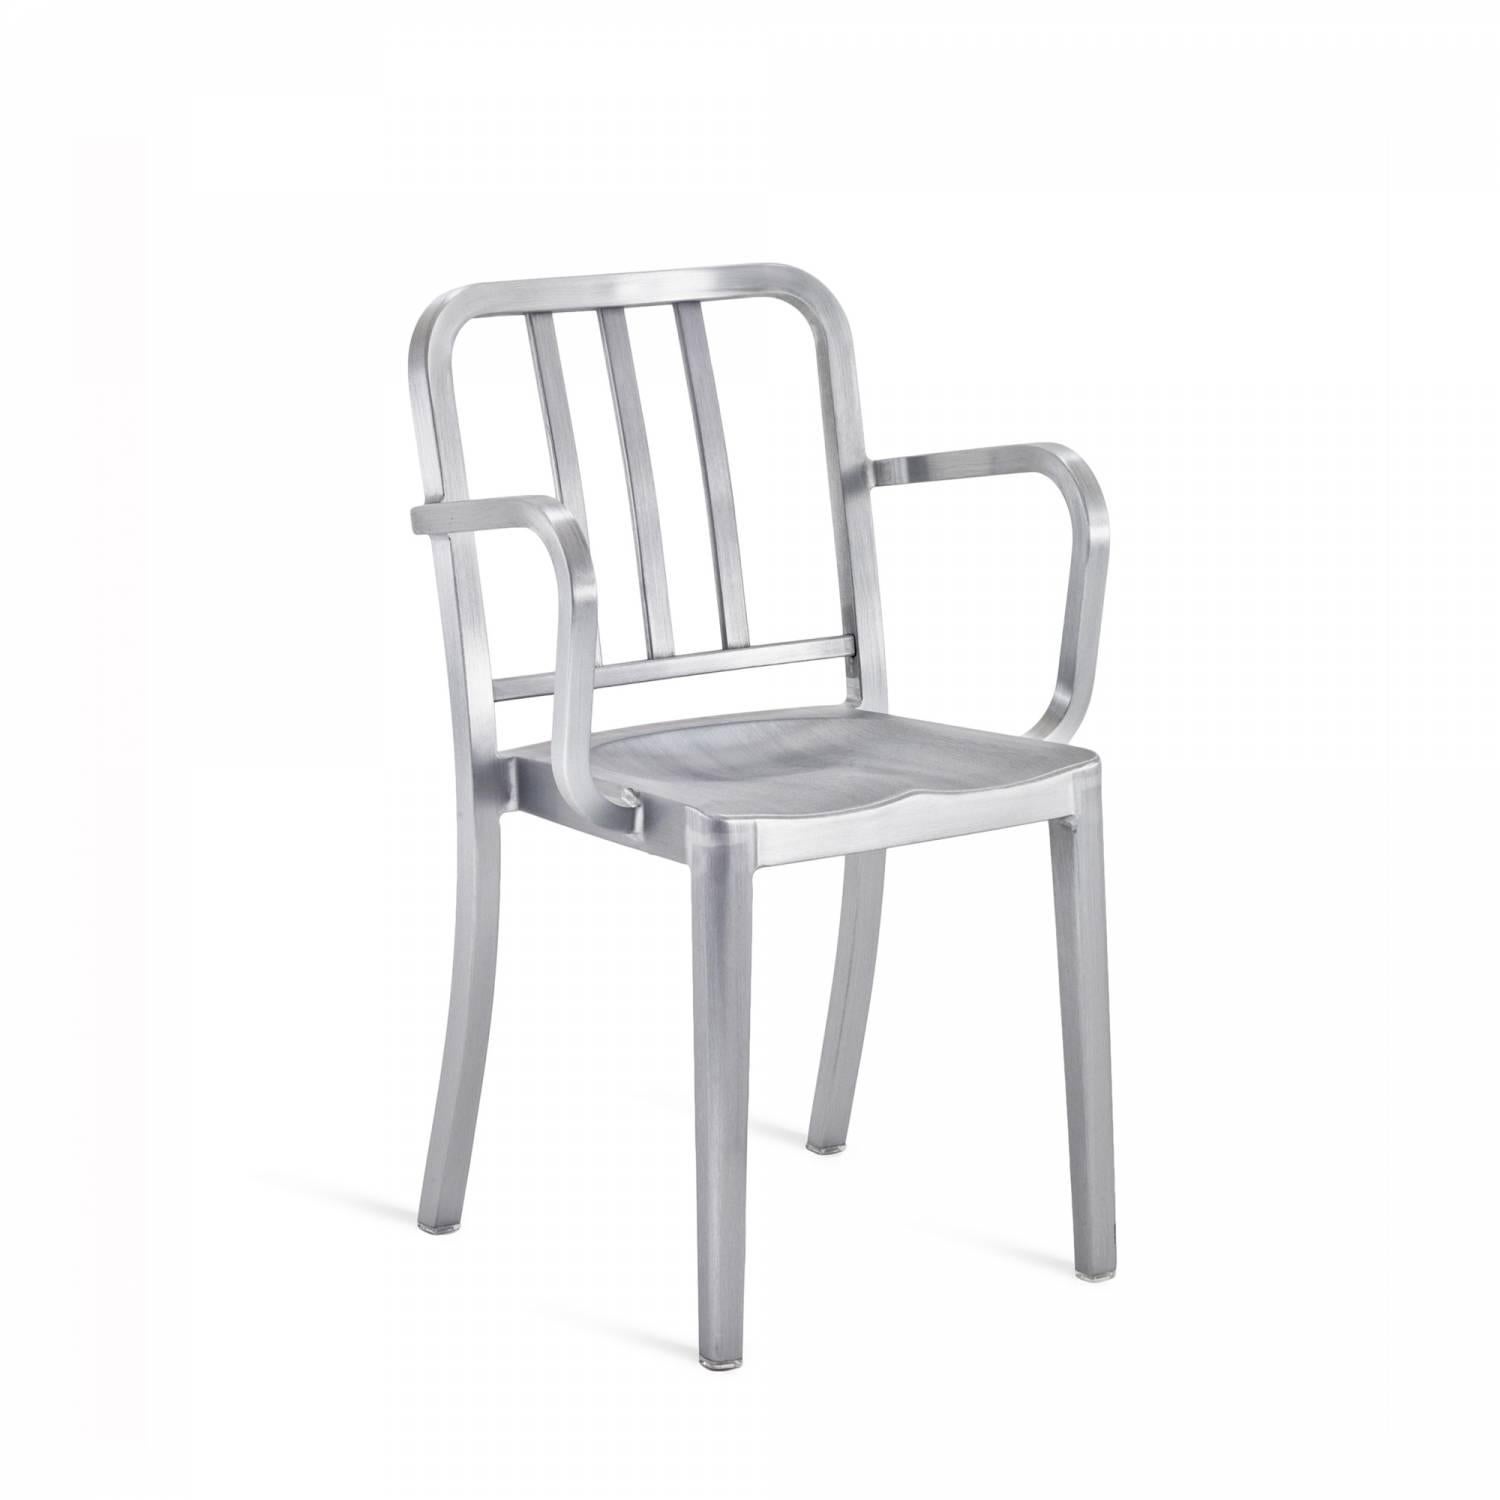 Heritage is a stacking chair designed by Philippe Starck, inspired by the original 1006 Navy. The rocking version was designed for the world famous Bon restaurant in Paris. Intended as a “sit up” chair for working and dining, it’s a symbol of